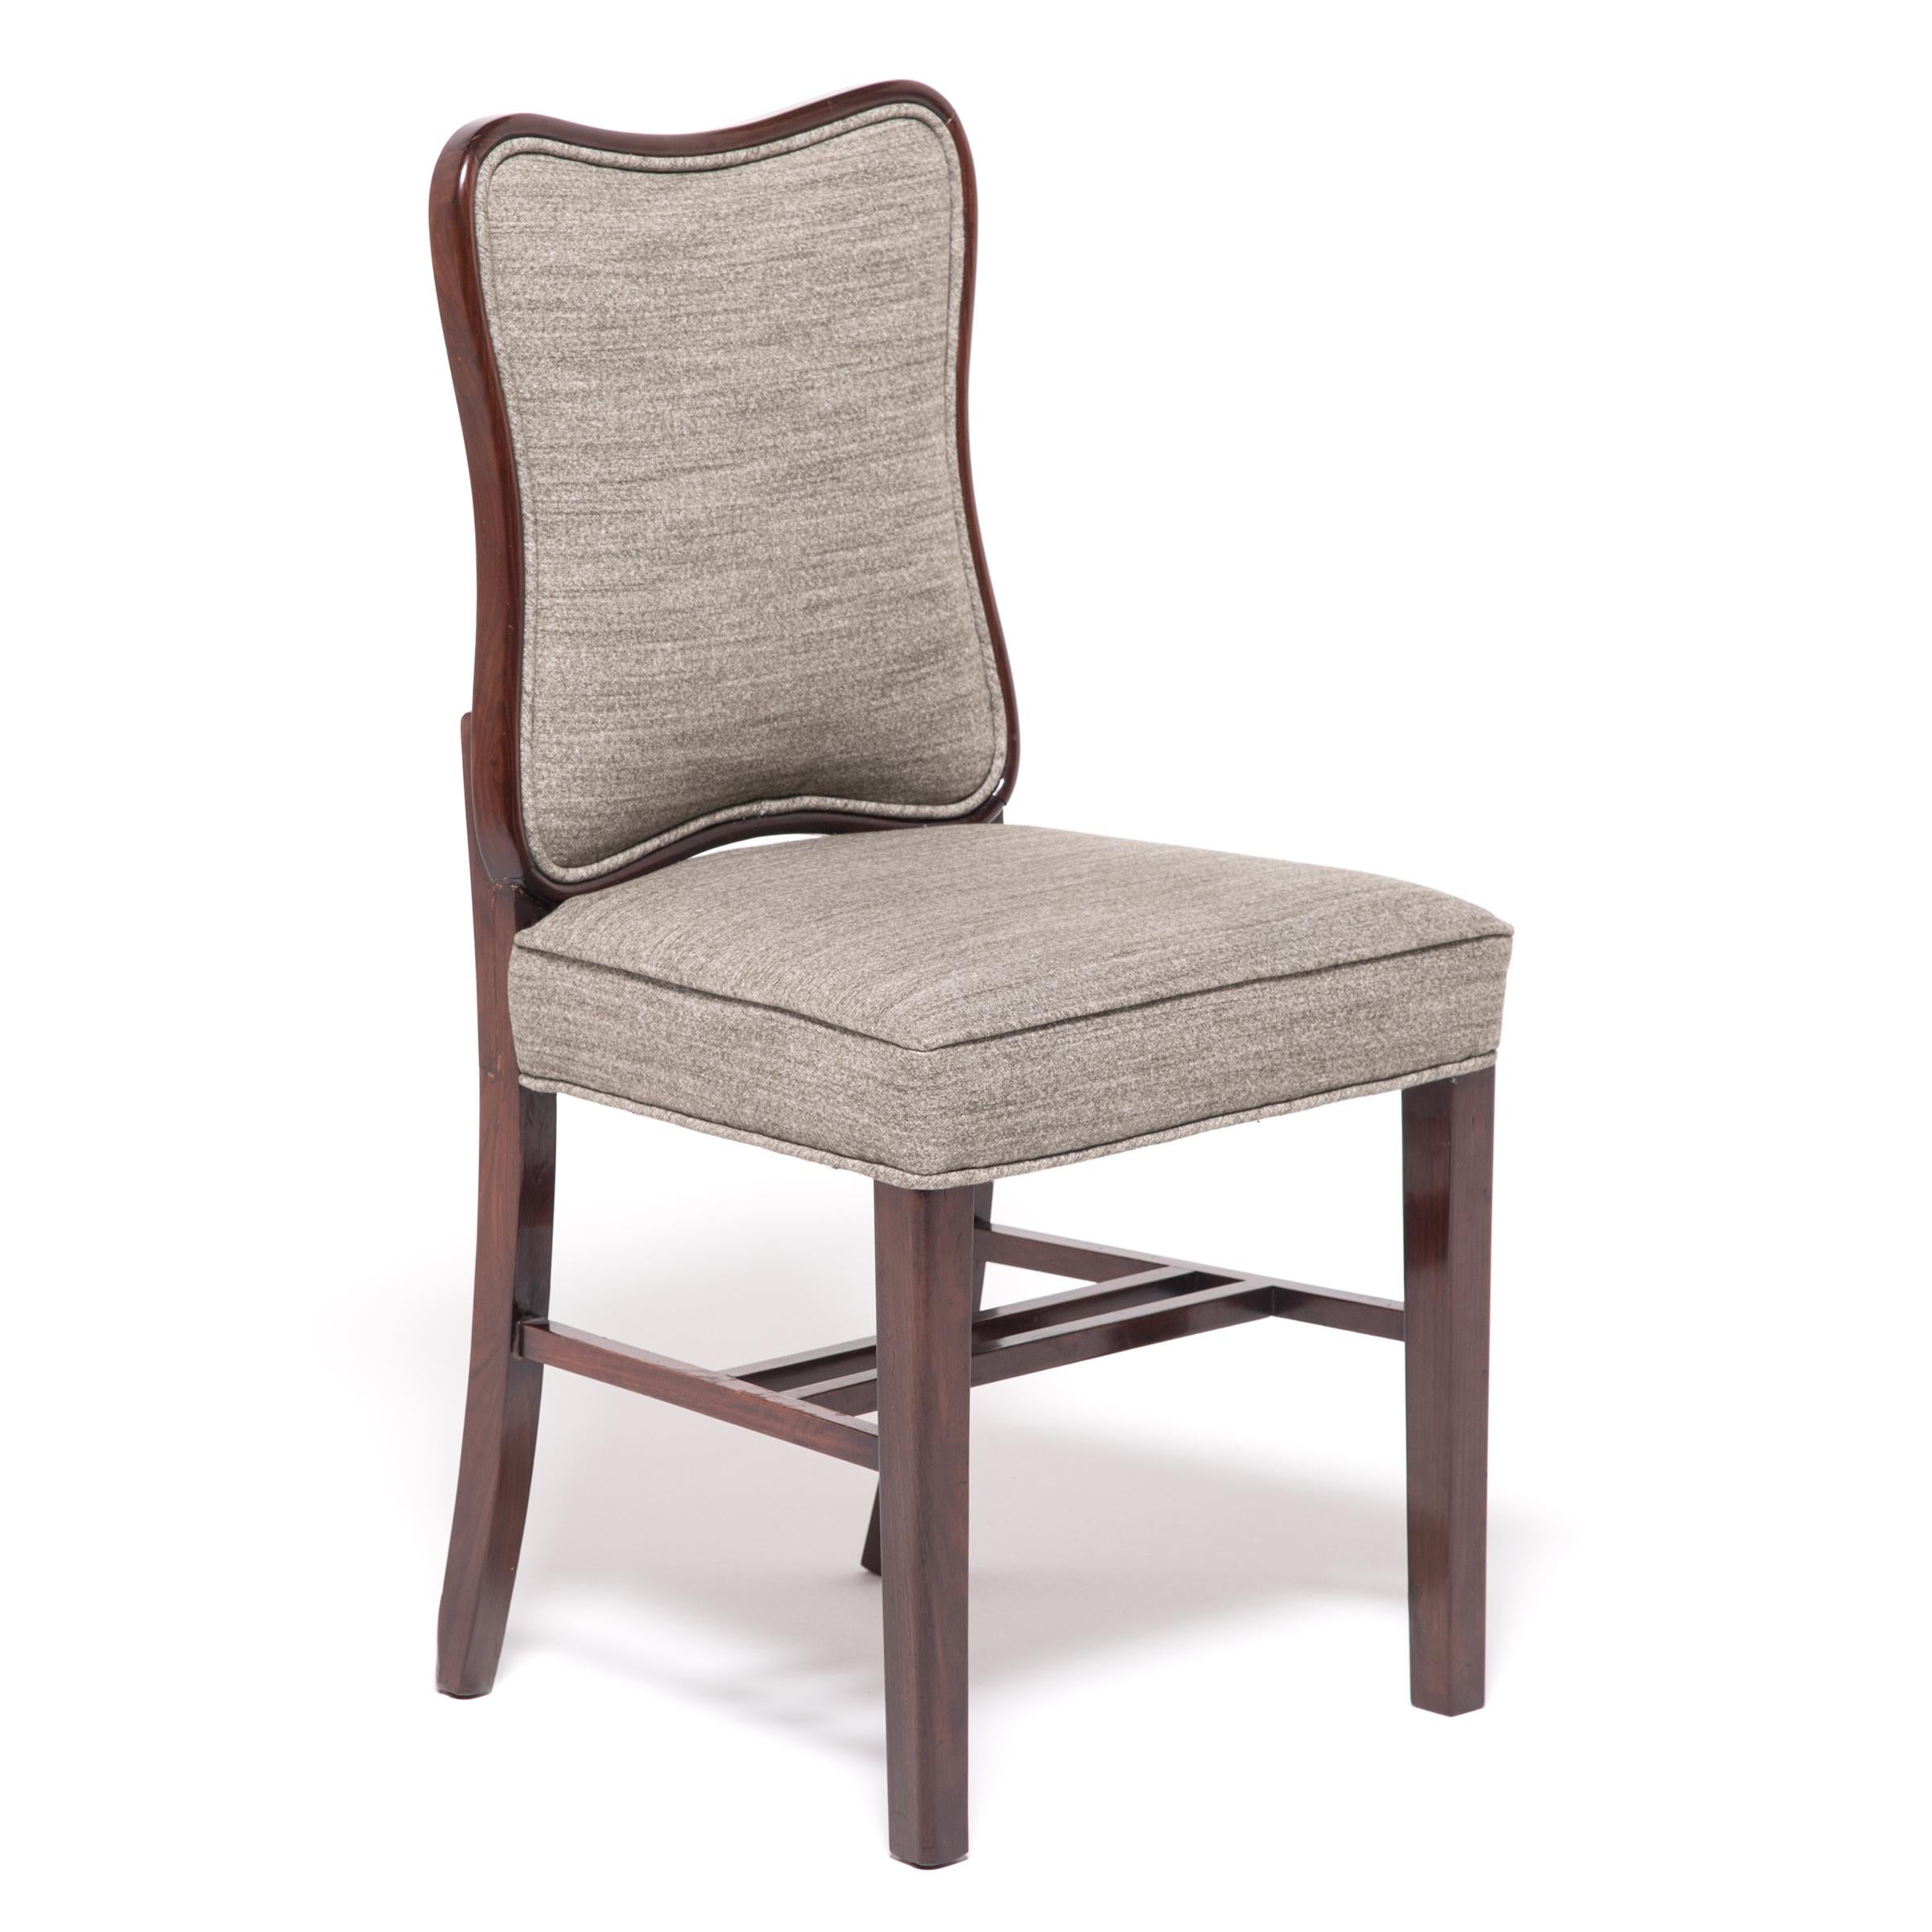 Made in the 1930s to satisfy the worldwide hunger for all things Art Deco, these unique chairs combine the streamlined style of the era with a Classic Chinese aesthetic. The beautiful hardwood frames hint at tradition with bamboo-like modeling and